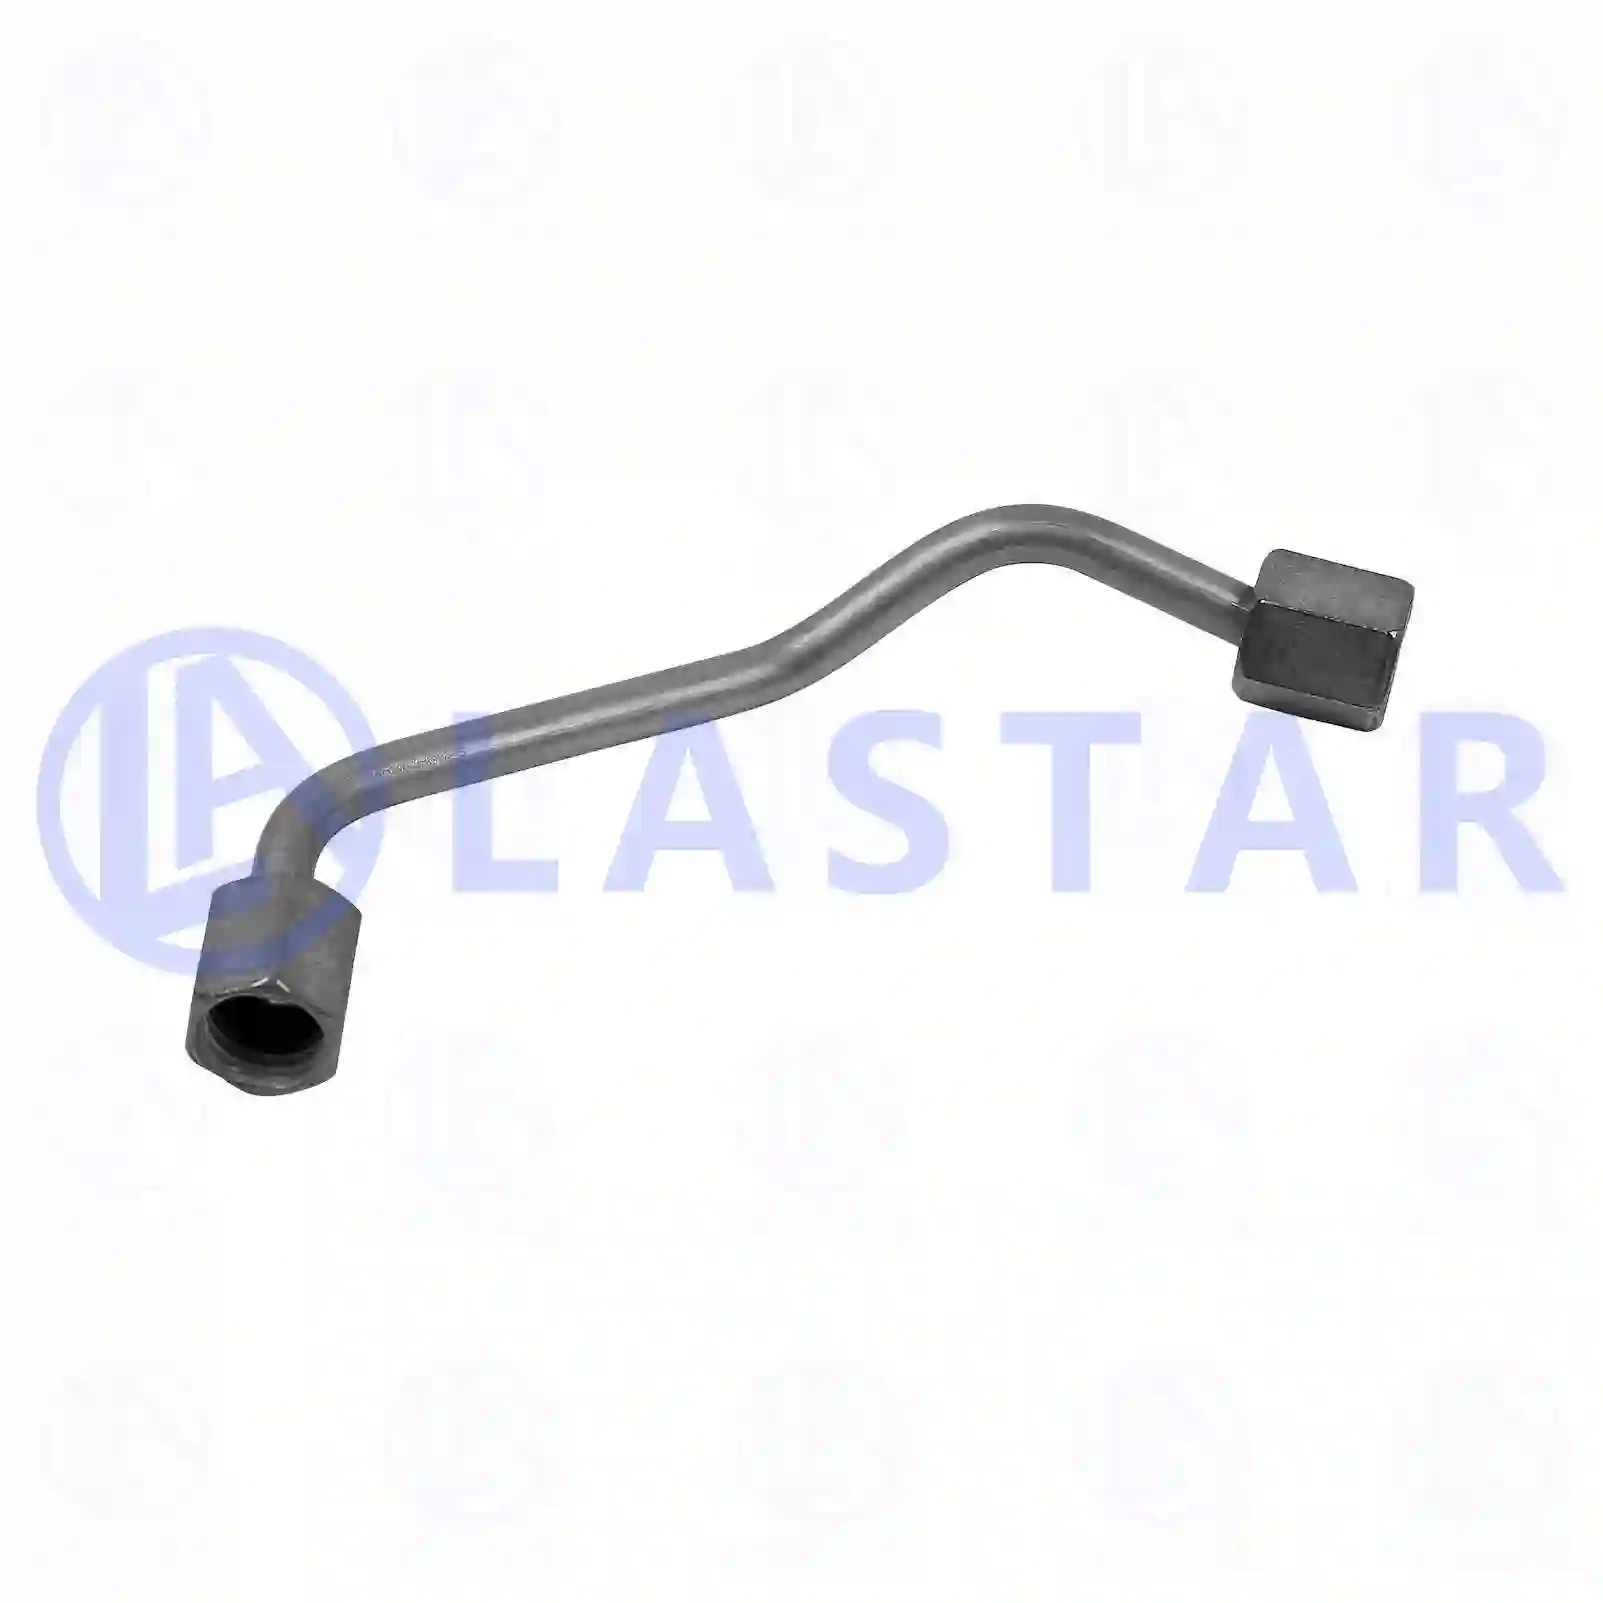 Injection line, 77723584, 6110701133 ||  77723584 Lastar Spare Part | Truck Spare Parts, Auotomotive Spare Parts Injection line, 77723584, 6110701133 ||  77723584 Lastar Spare Part | Truck Spare Parts, Auotomotive Spare Parts